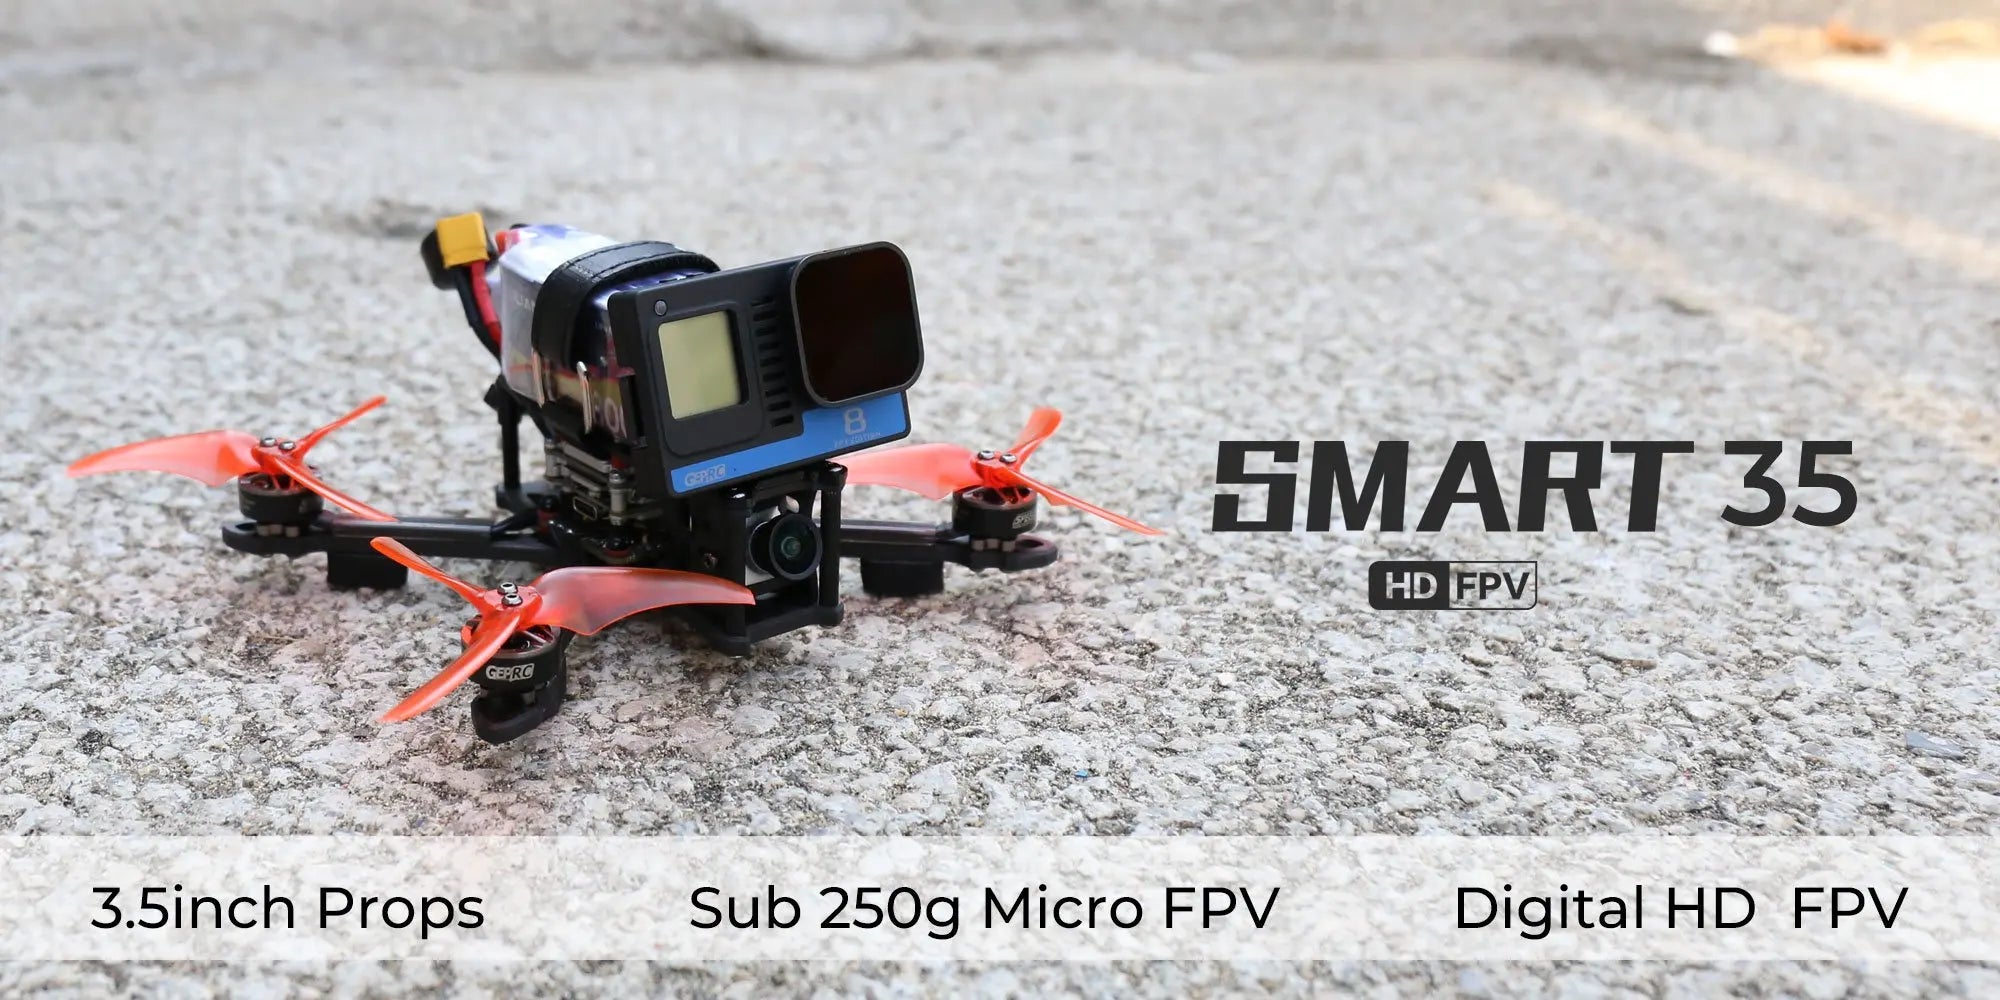 GEPRC SMART 35 FPV Drone, Equipped with Vista Nebula nano HD image transmission system